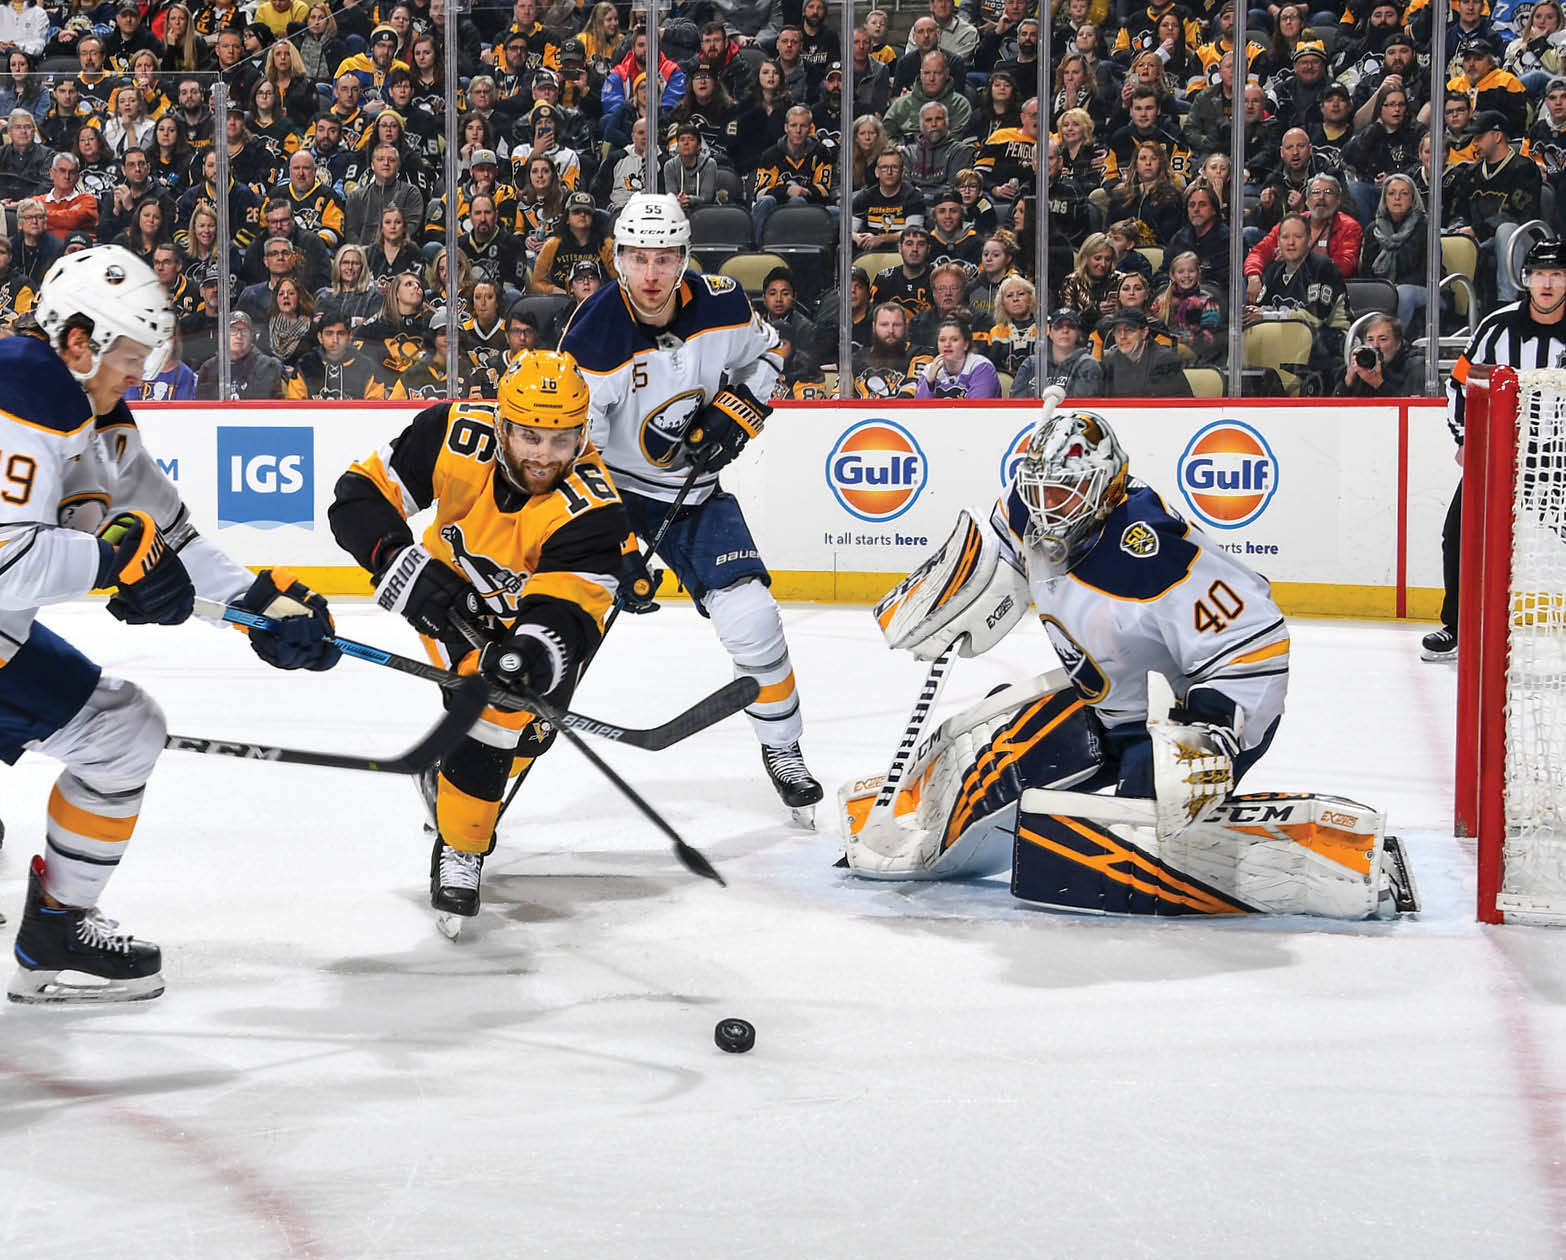 February 22, 2020 - Pittsburgh Penguins vs Buffalo Sabres at PPG Paints Arena  Buffalo won the game 5-2 